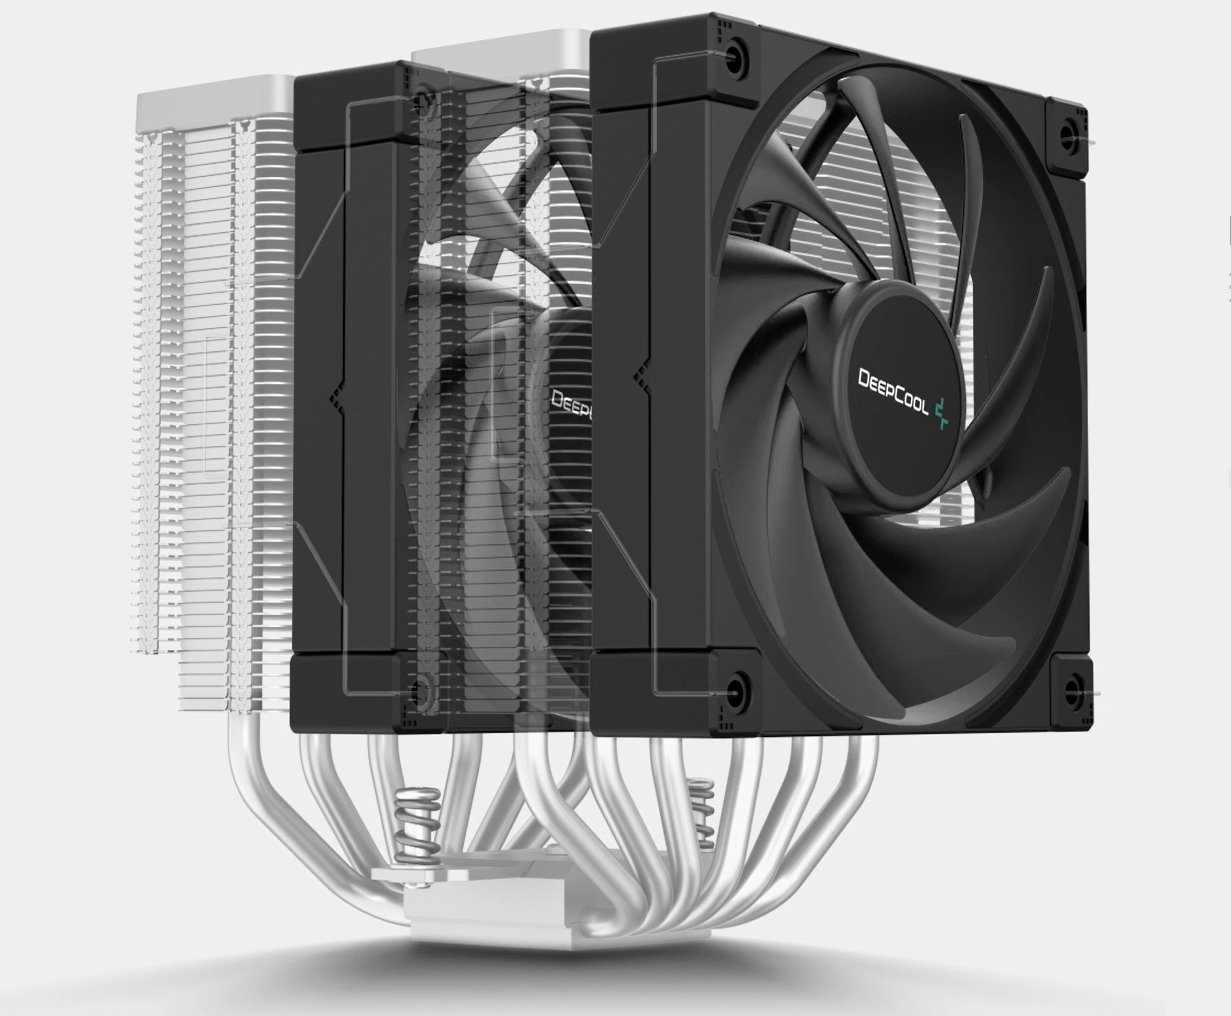 DeepCool AK620 WH High-Performance CPU Cooler, Dual-Tower Design, 2x 120mm  Fluid Dynamic Bearing Fans, 6 Copper Heat Pipes, 260W Heat Dissipation,  White. 